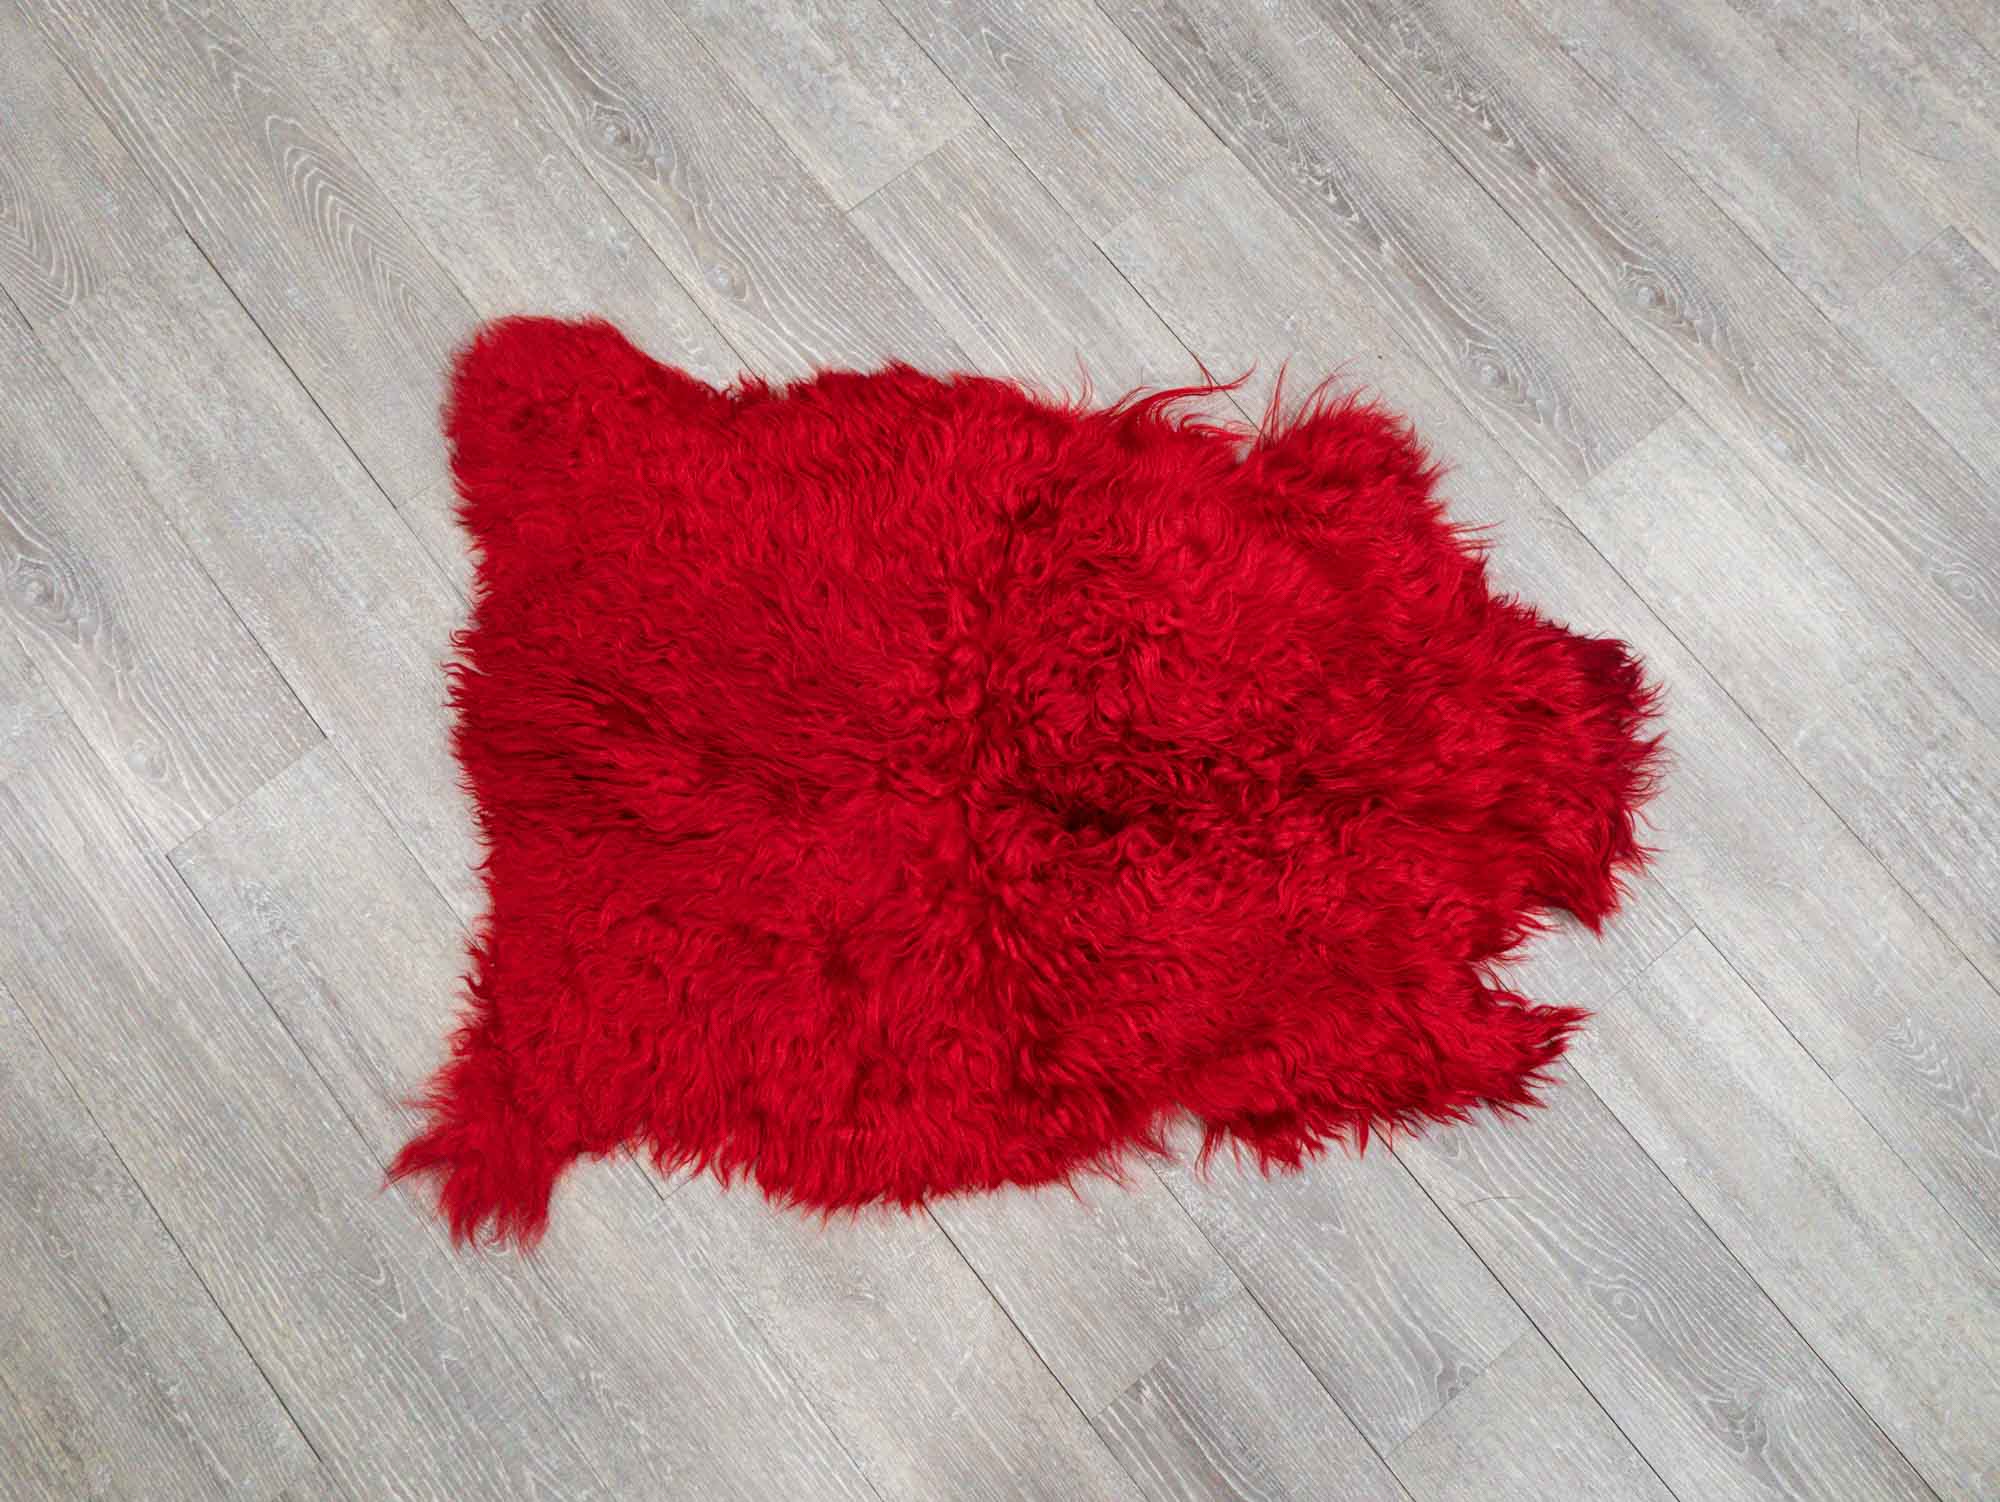 Dyed Angora Goatskin: #1: Extra Large: Red: Gallery Item - 66-A1XL-RD-G4979 (10UB06)